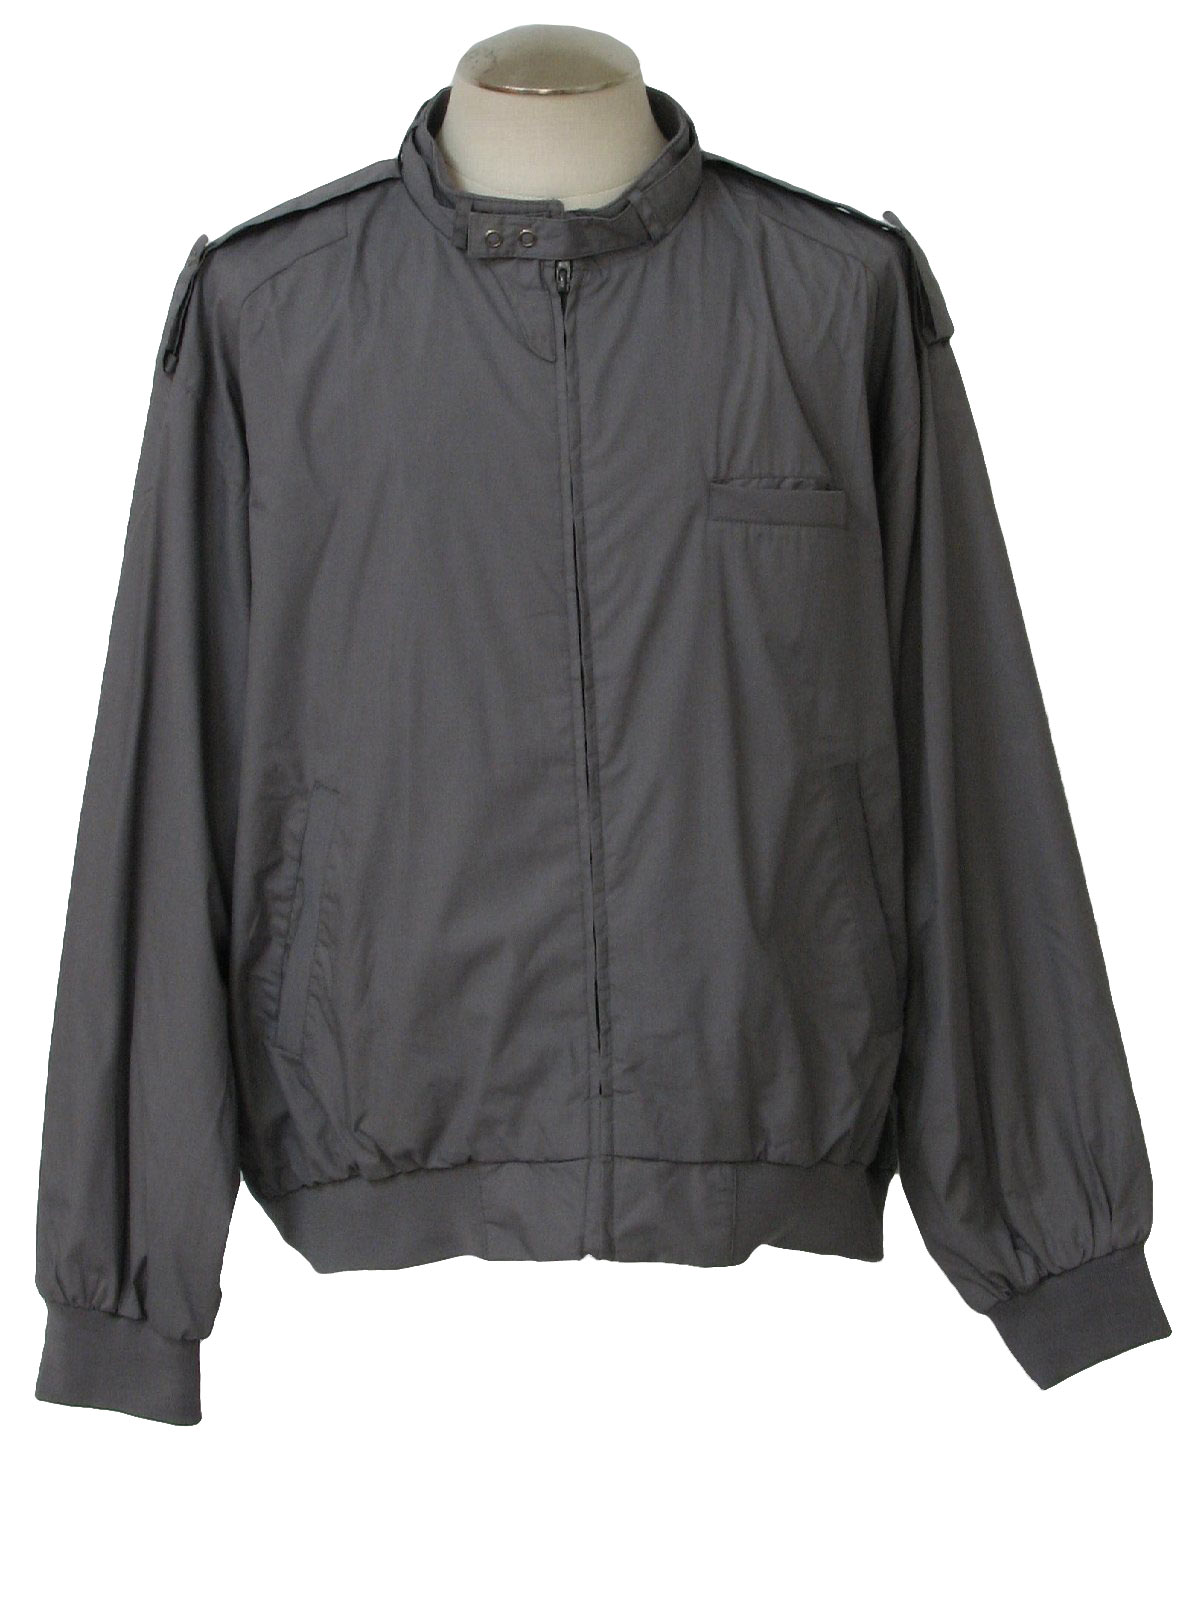 Eighties Towncraft Jacket: 80s -Towncraft- Mens grey cotton and ...